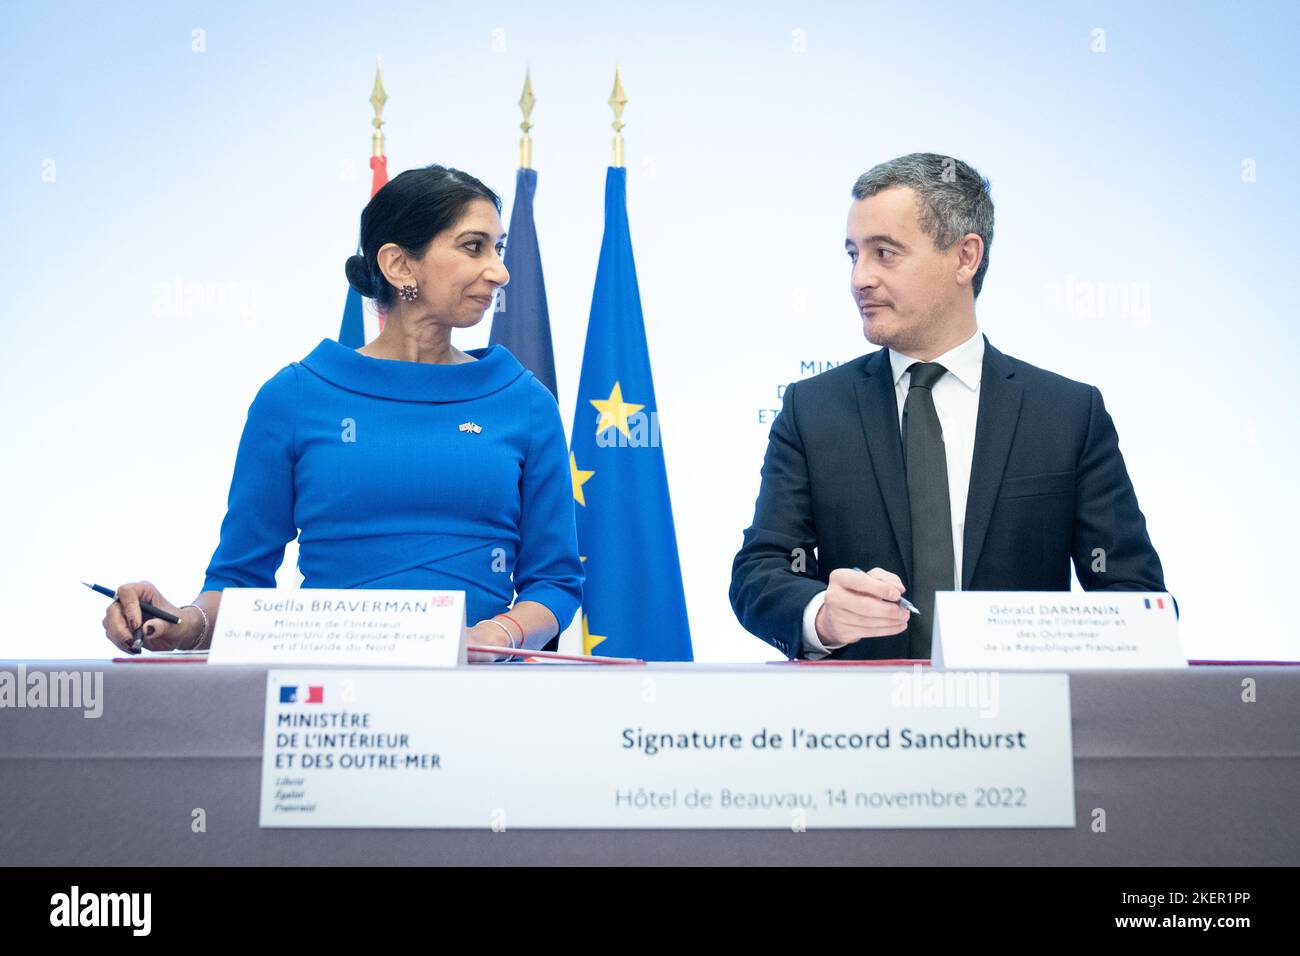 Home Secretary Suella Braverman signs a historic deal with the French Interior Minister Gerald Darmanin, at the Interior Ministry in Paris, France, to tackle the small boats crisis as pressure mounts on the British immigration system, with Channel crossings topping 40,000 so far this year. Picture date: Monday November 14, 2022. Stock Photo